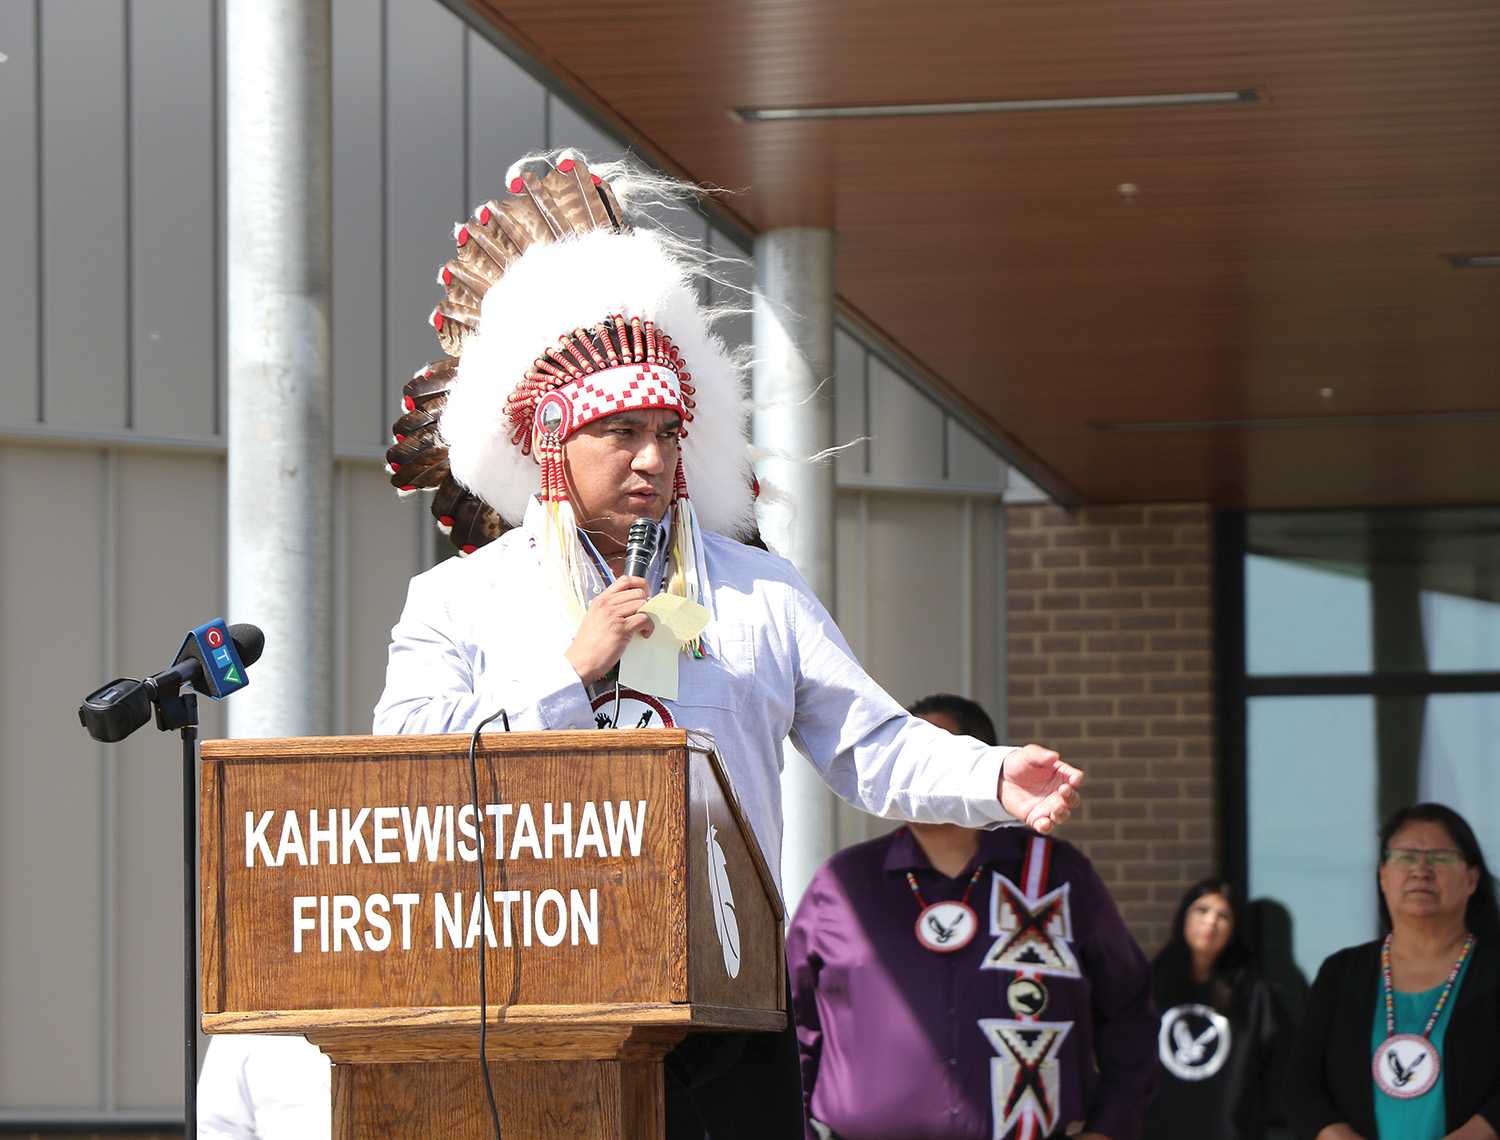 Chief Evan Taypotat speaks at the grand opening of the Chief Joseph Crowe Governance Centre on Kahkewistahaw First Nation Wednesday.